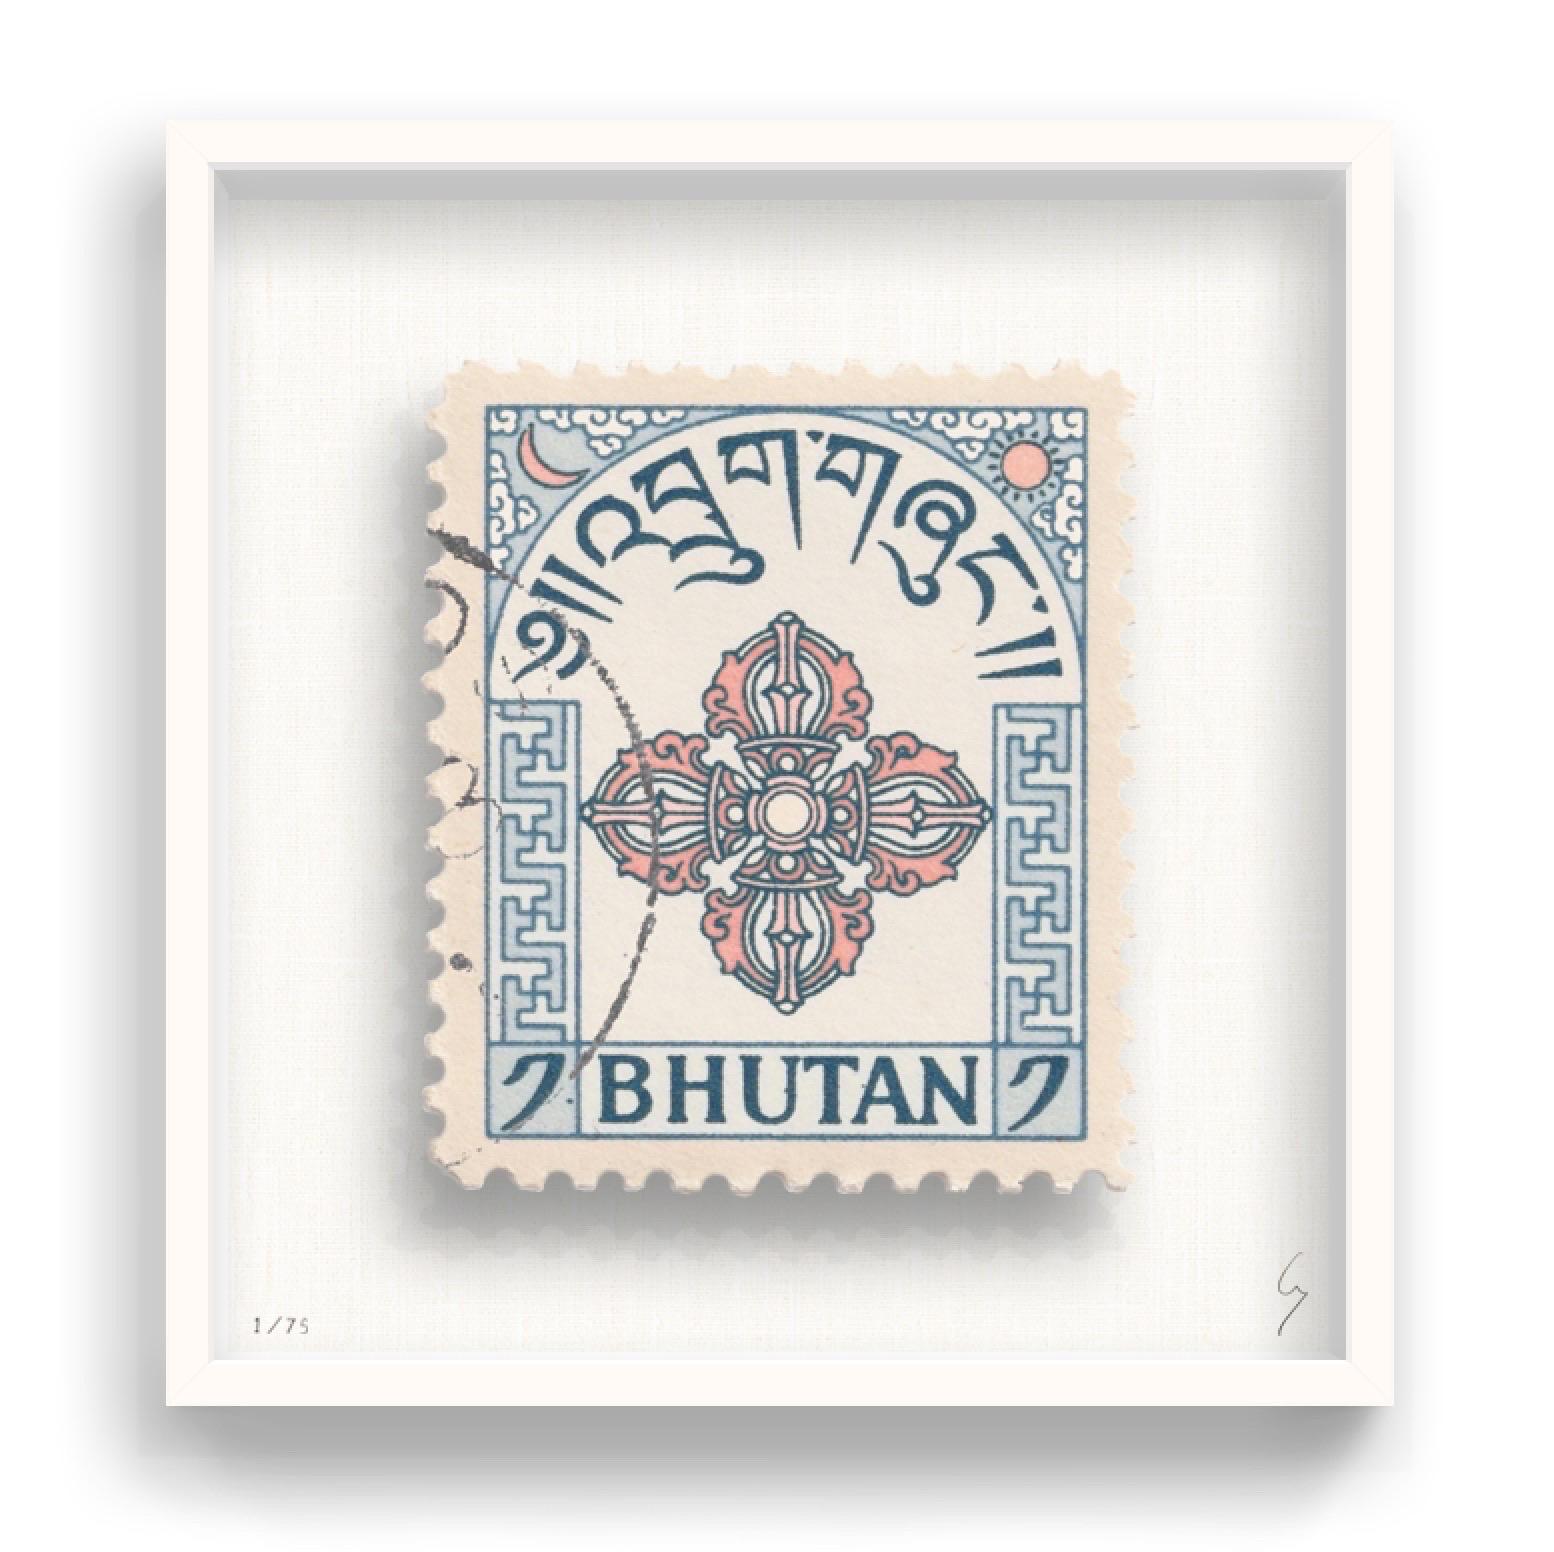 Guy Gee, Bhutan (medium)

Hand-engraved print on 350gsm on G.F Smith card
53 x 56cm (20 4/5 x 22 2/5 in)
Frame included 
Edition of 75 

Each artwork by Guy had been digitally reimagined from an original postage stamp. Cut out and finished by hand,